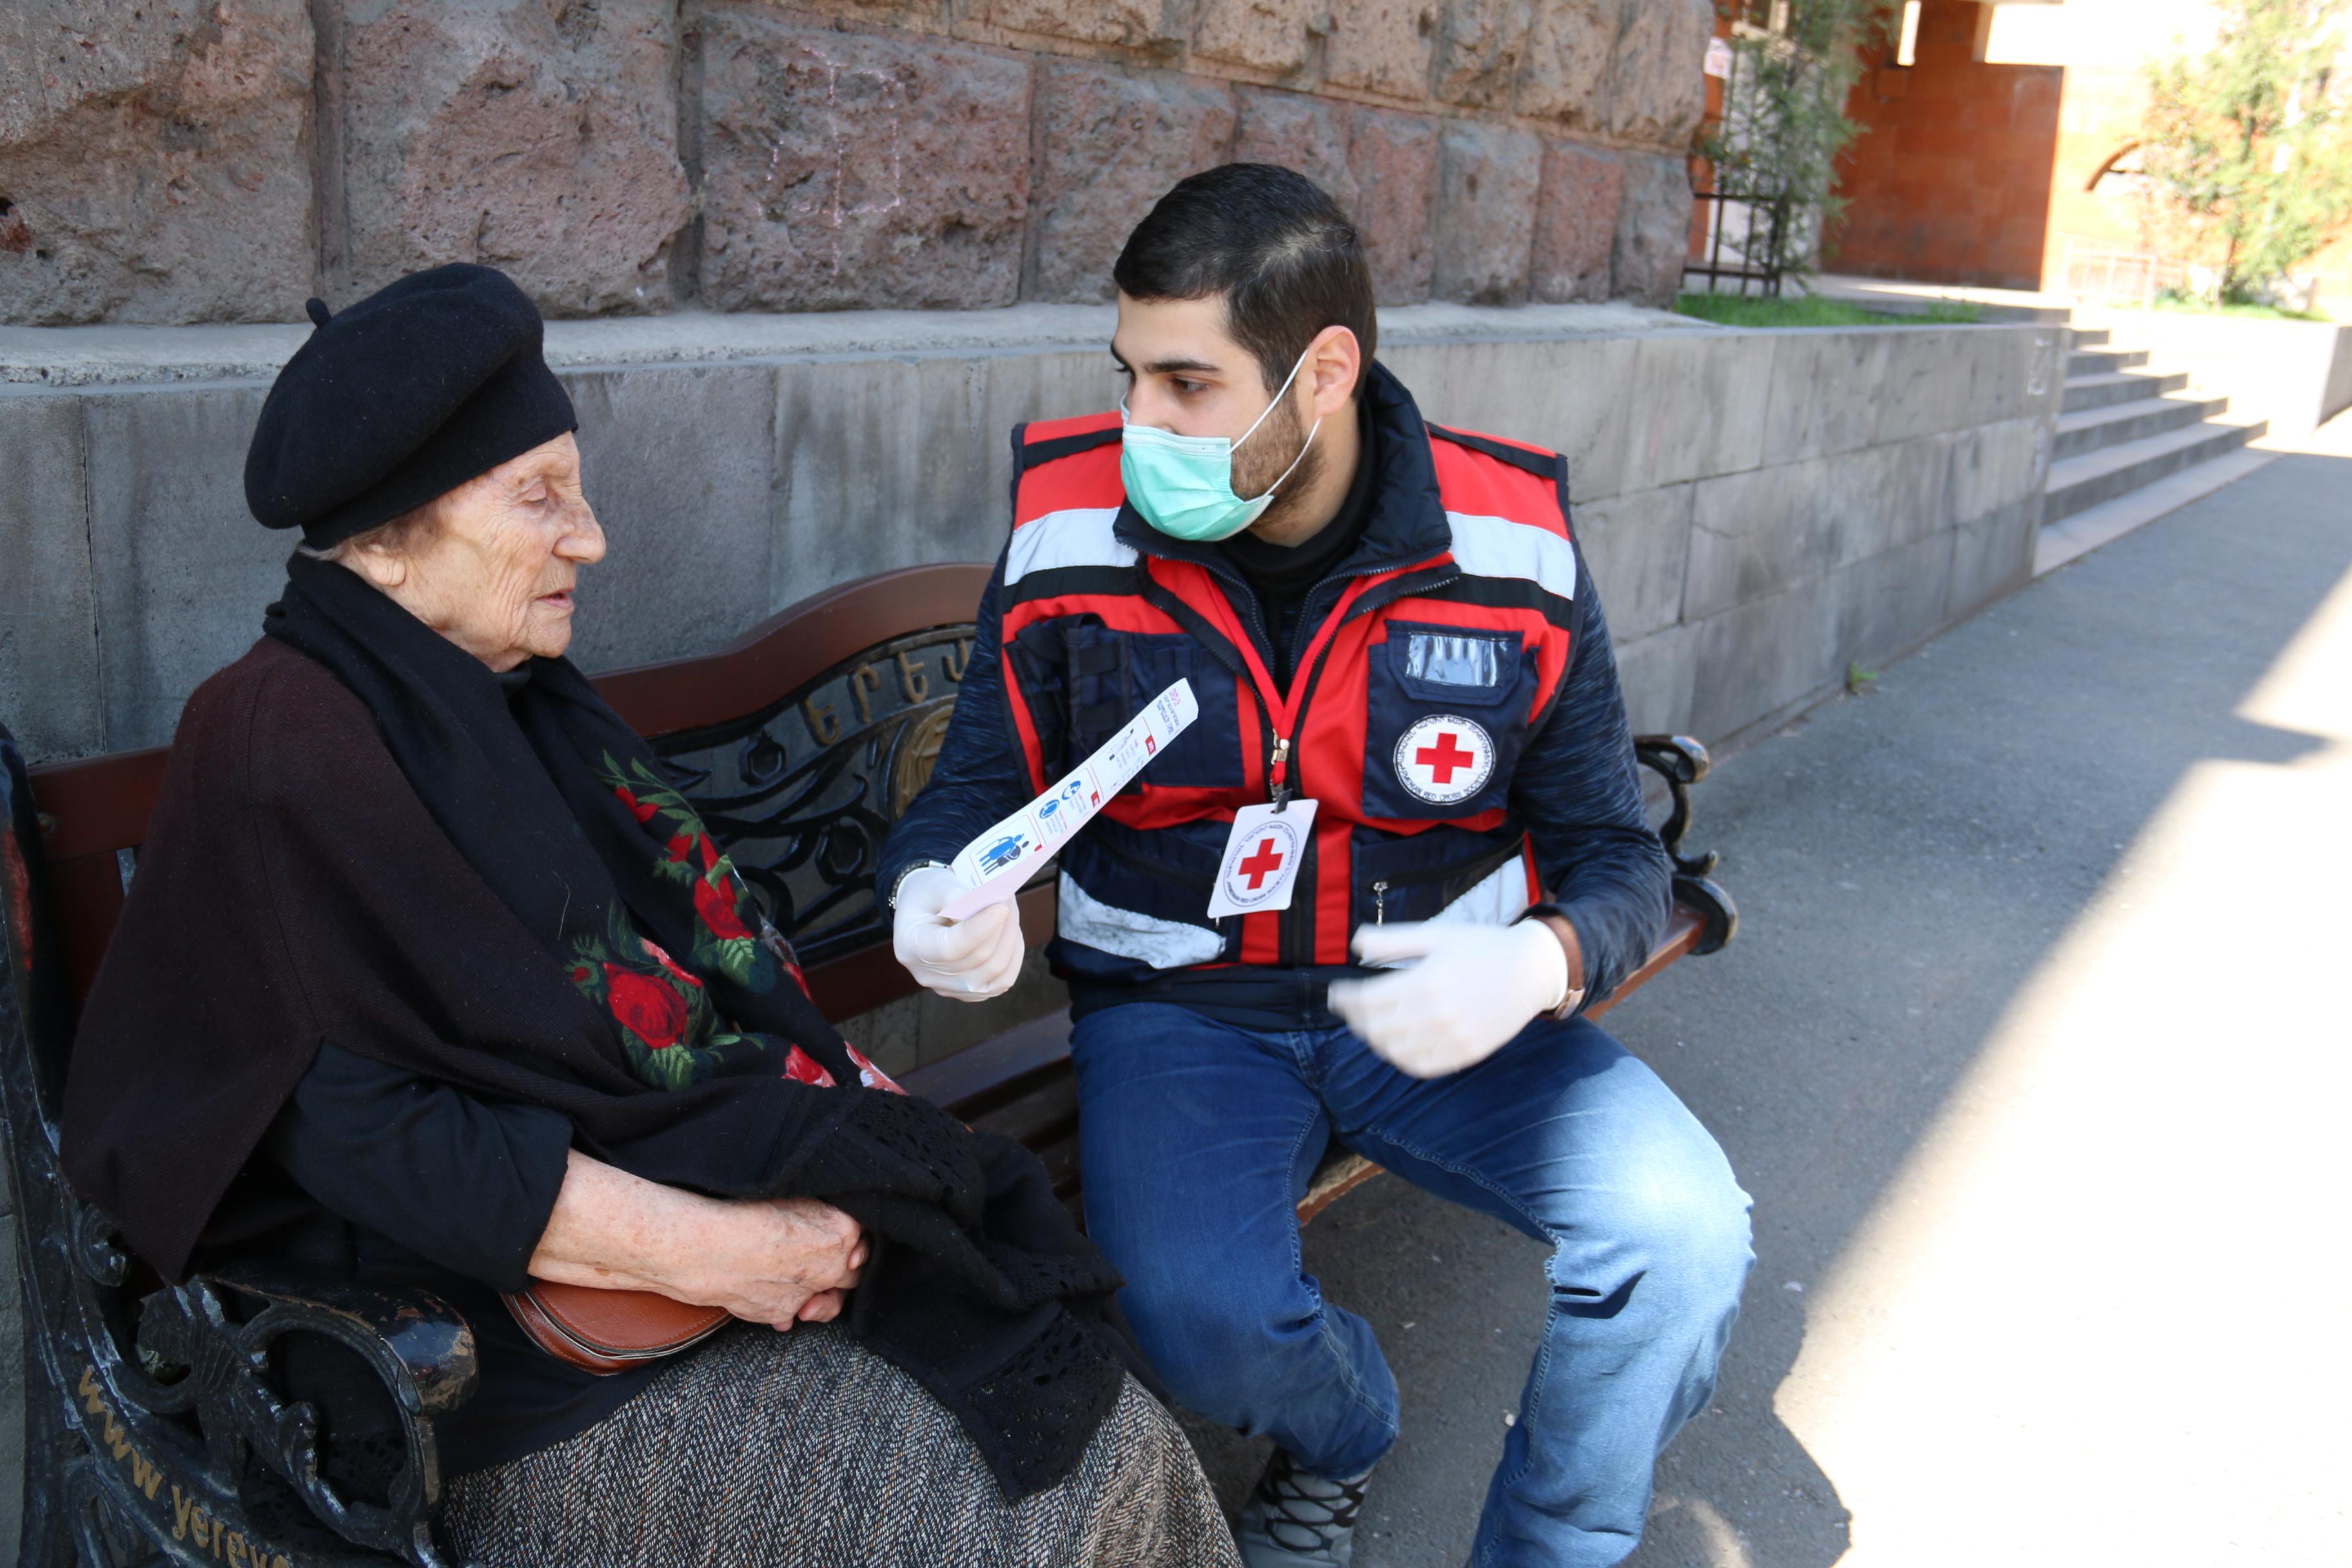 An Armenian Red Cross volunteer sits on a bench outside with an elderly lady and informs her about the risks of coronavirus transmission.